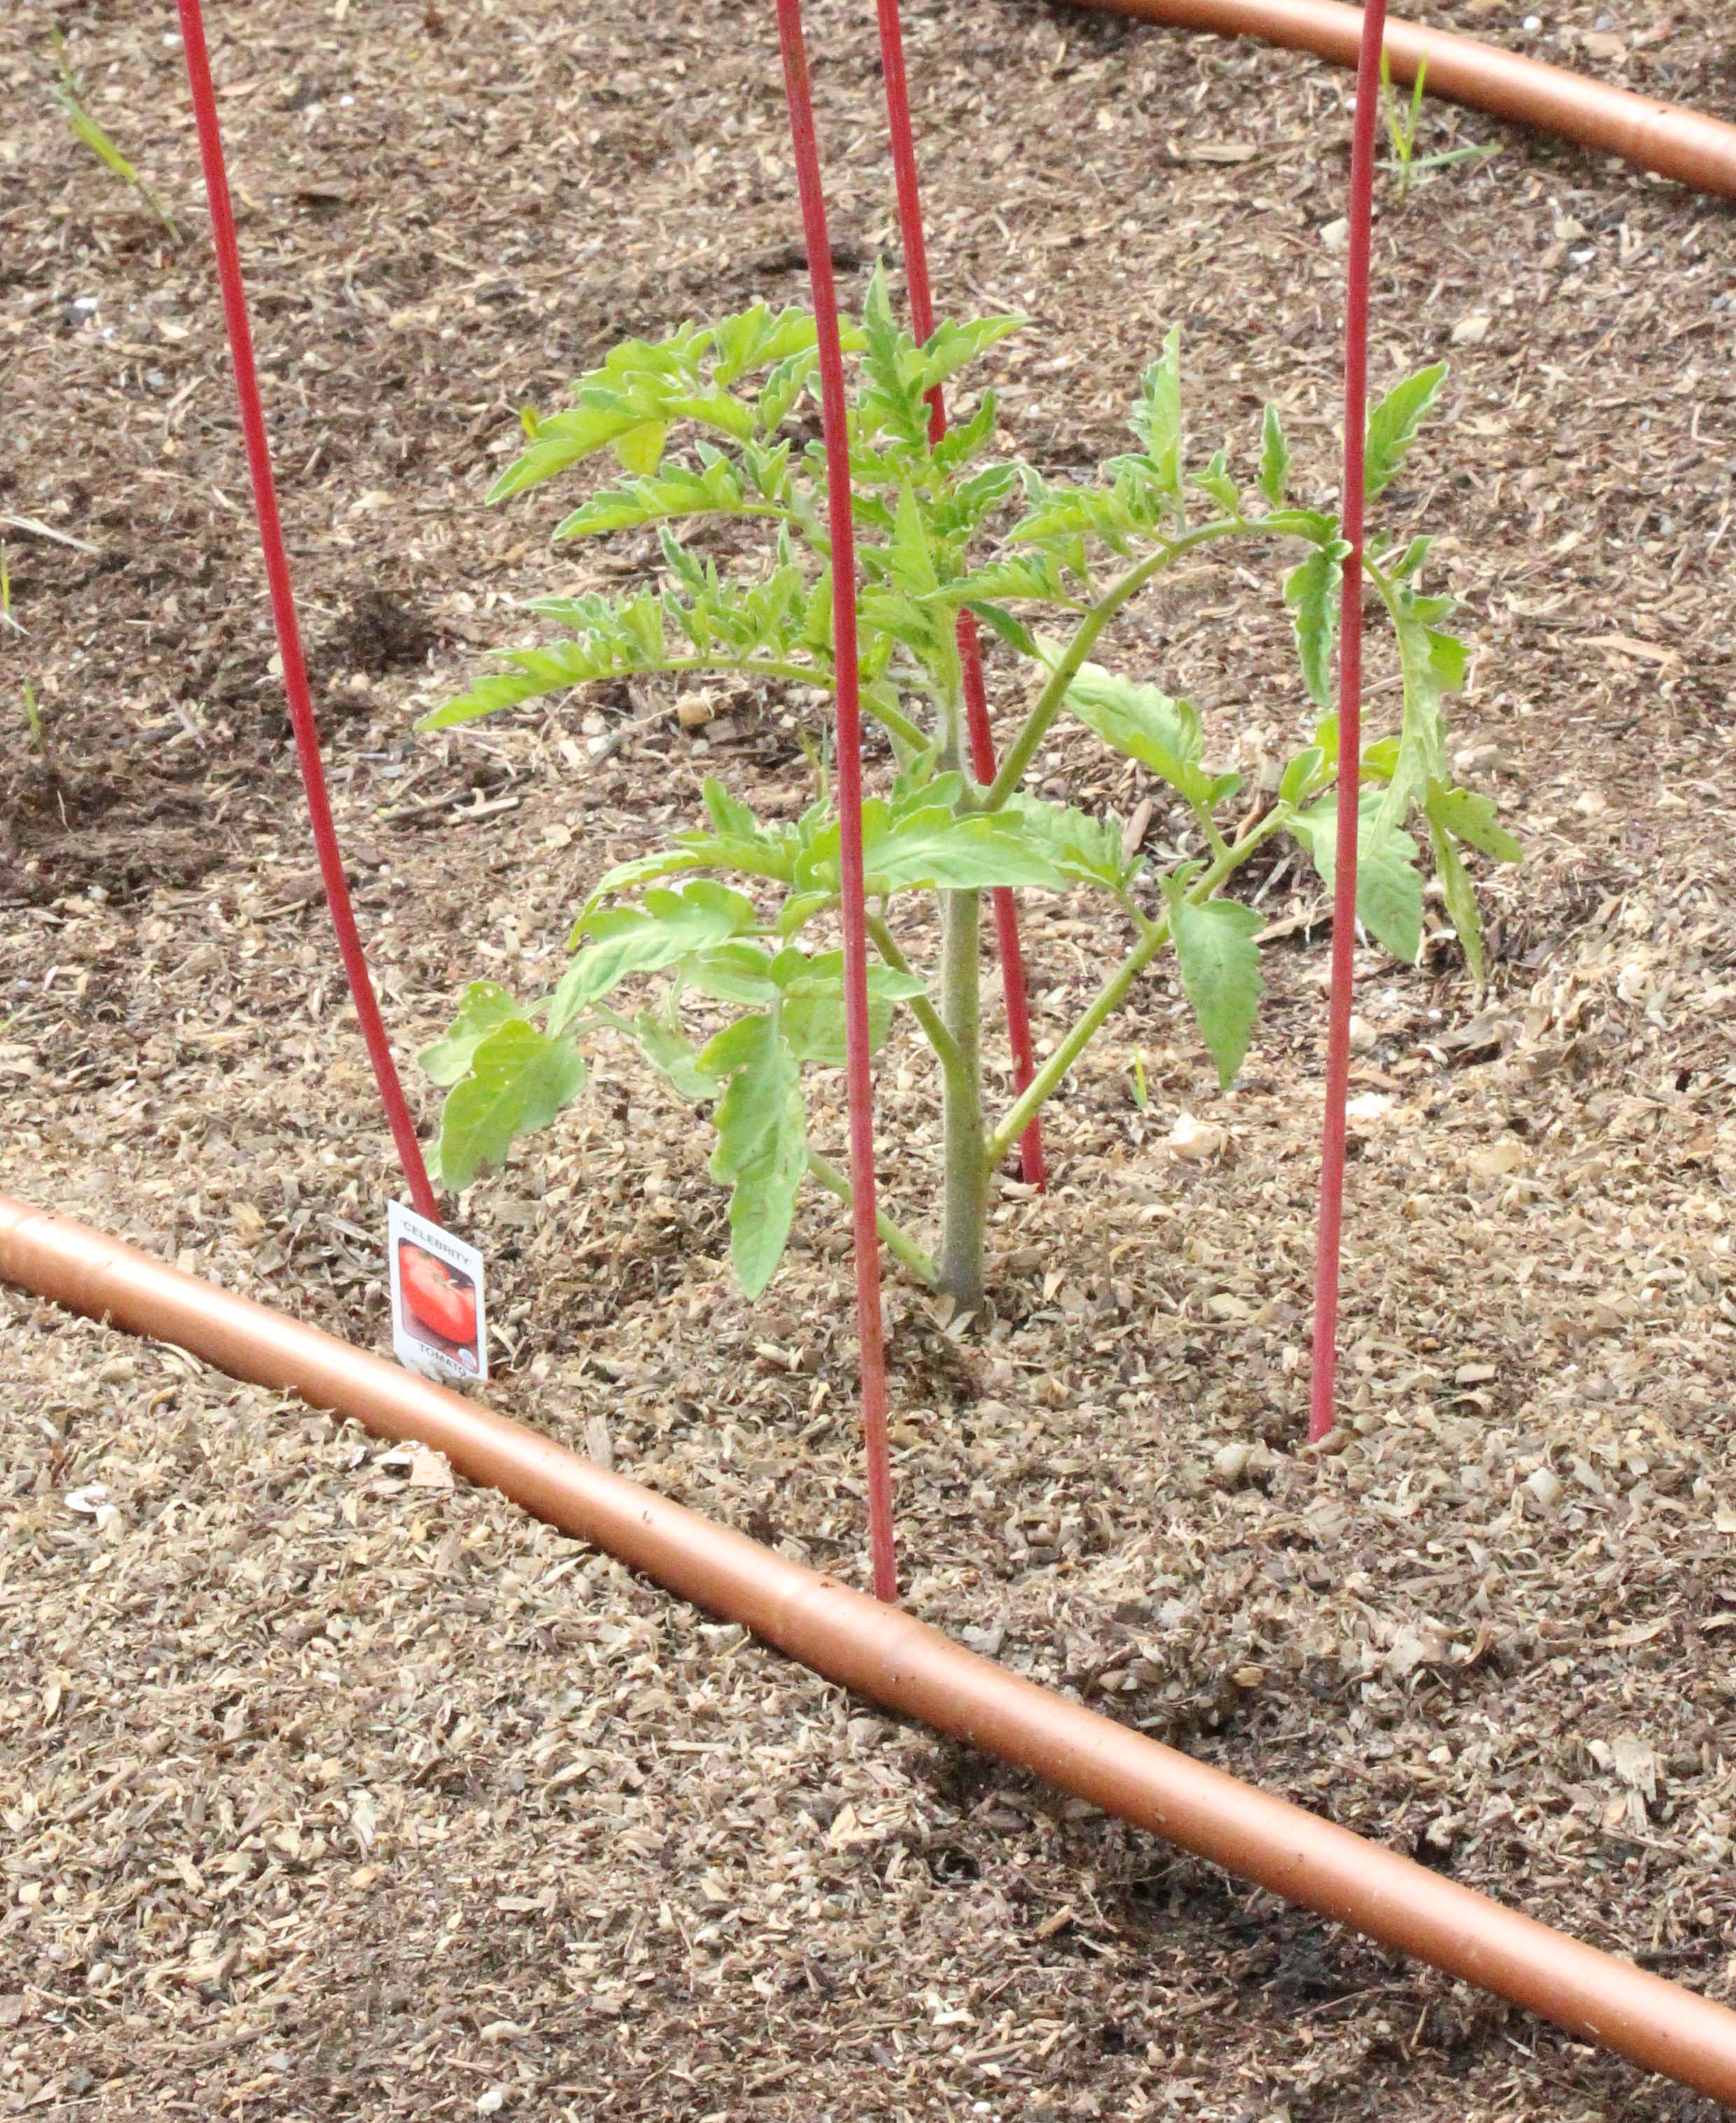 The GardenZeus Guide to Watering Tomatoes